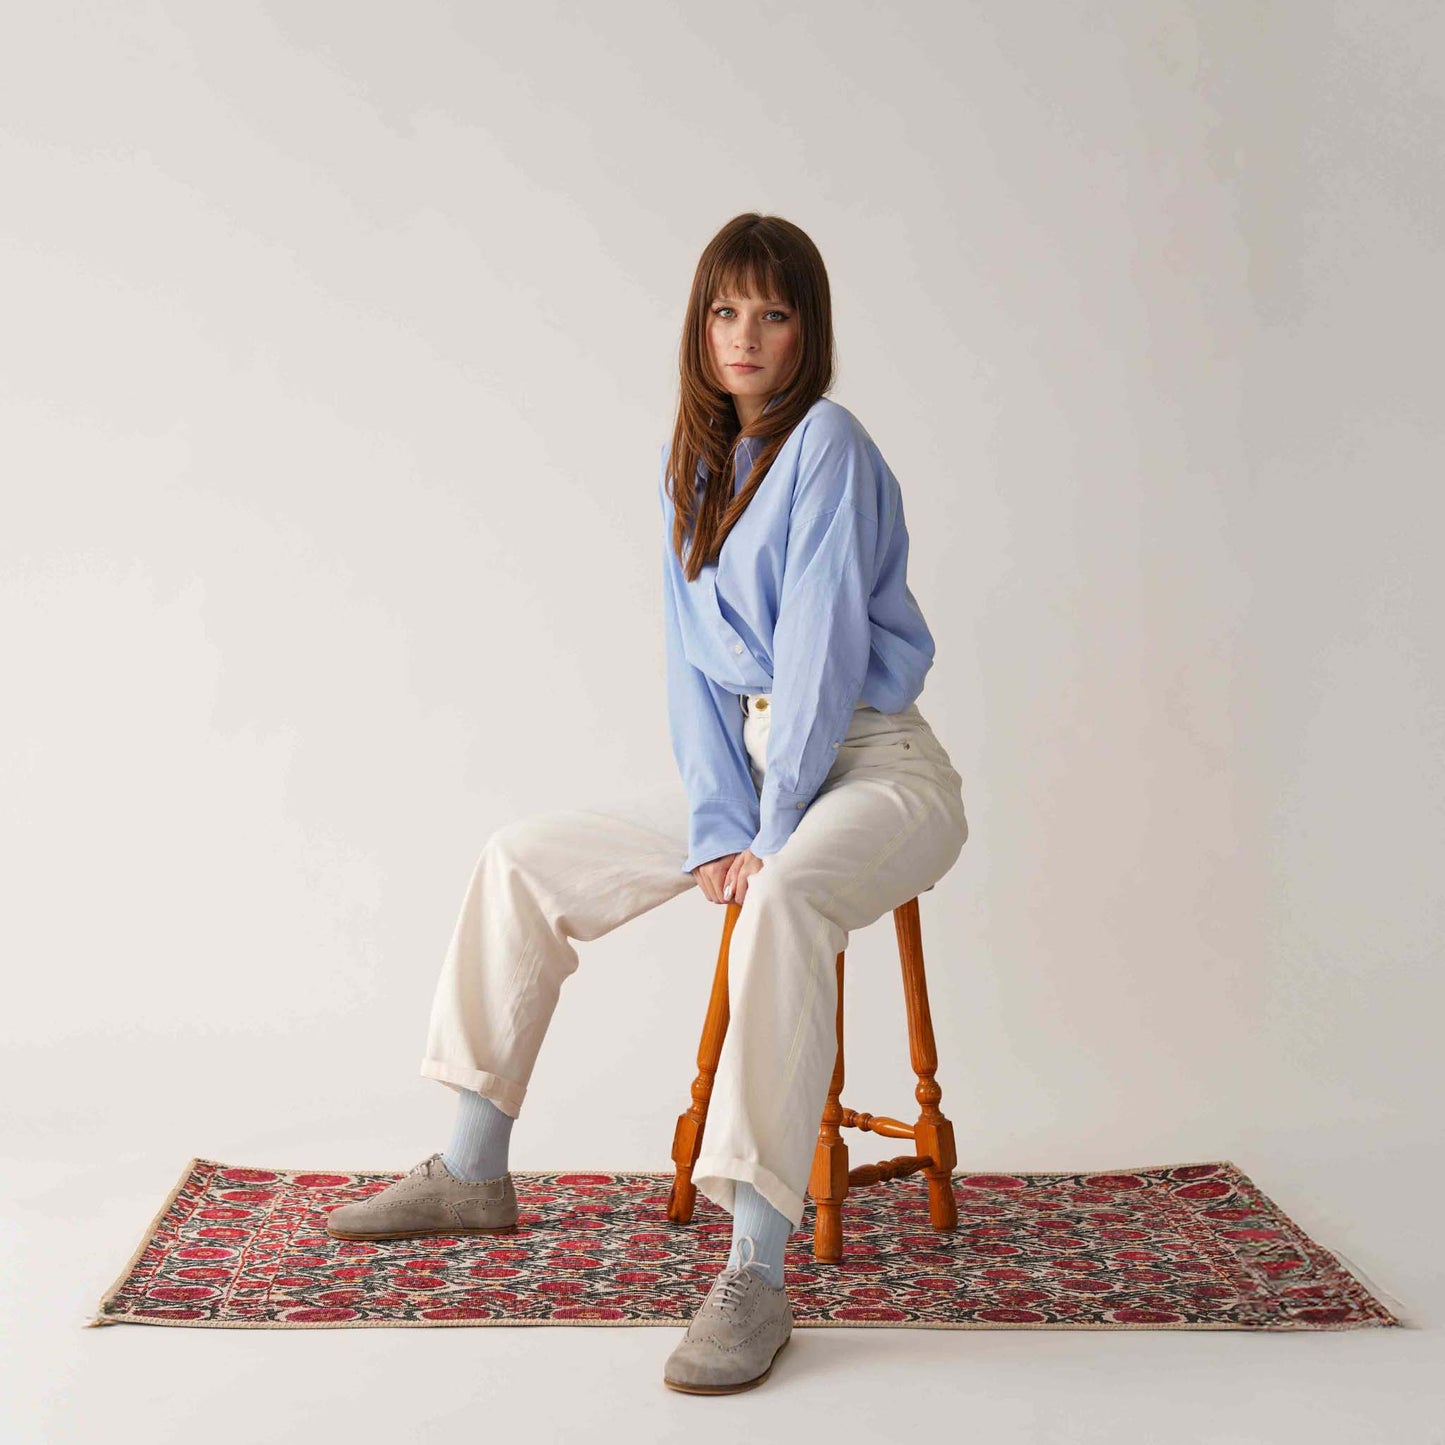 Model wearing gray Doris leather barefoot women's oxfords, sitting on a wooden stool on a patterned rug.